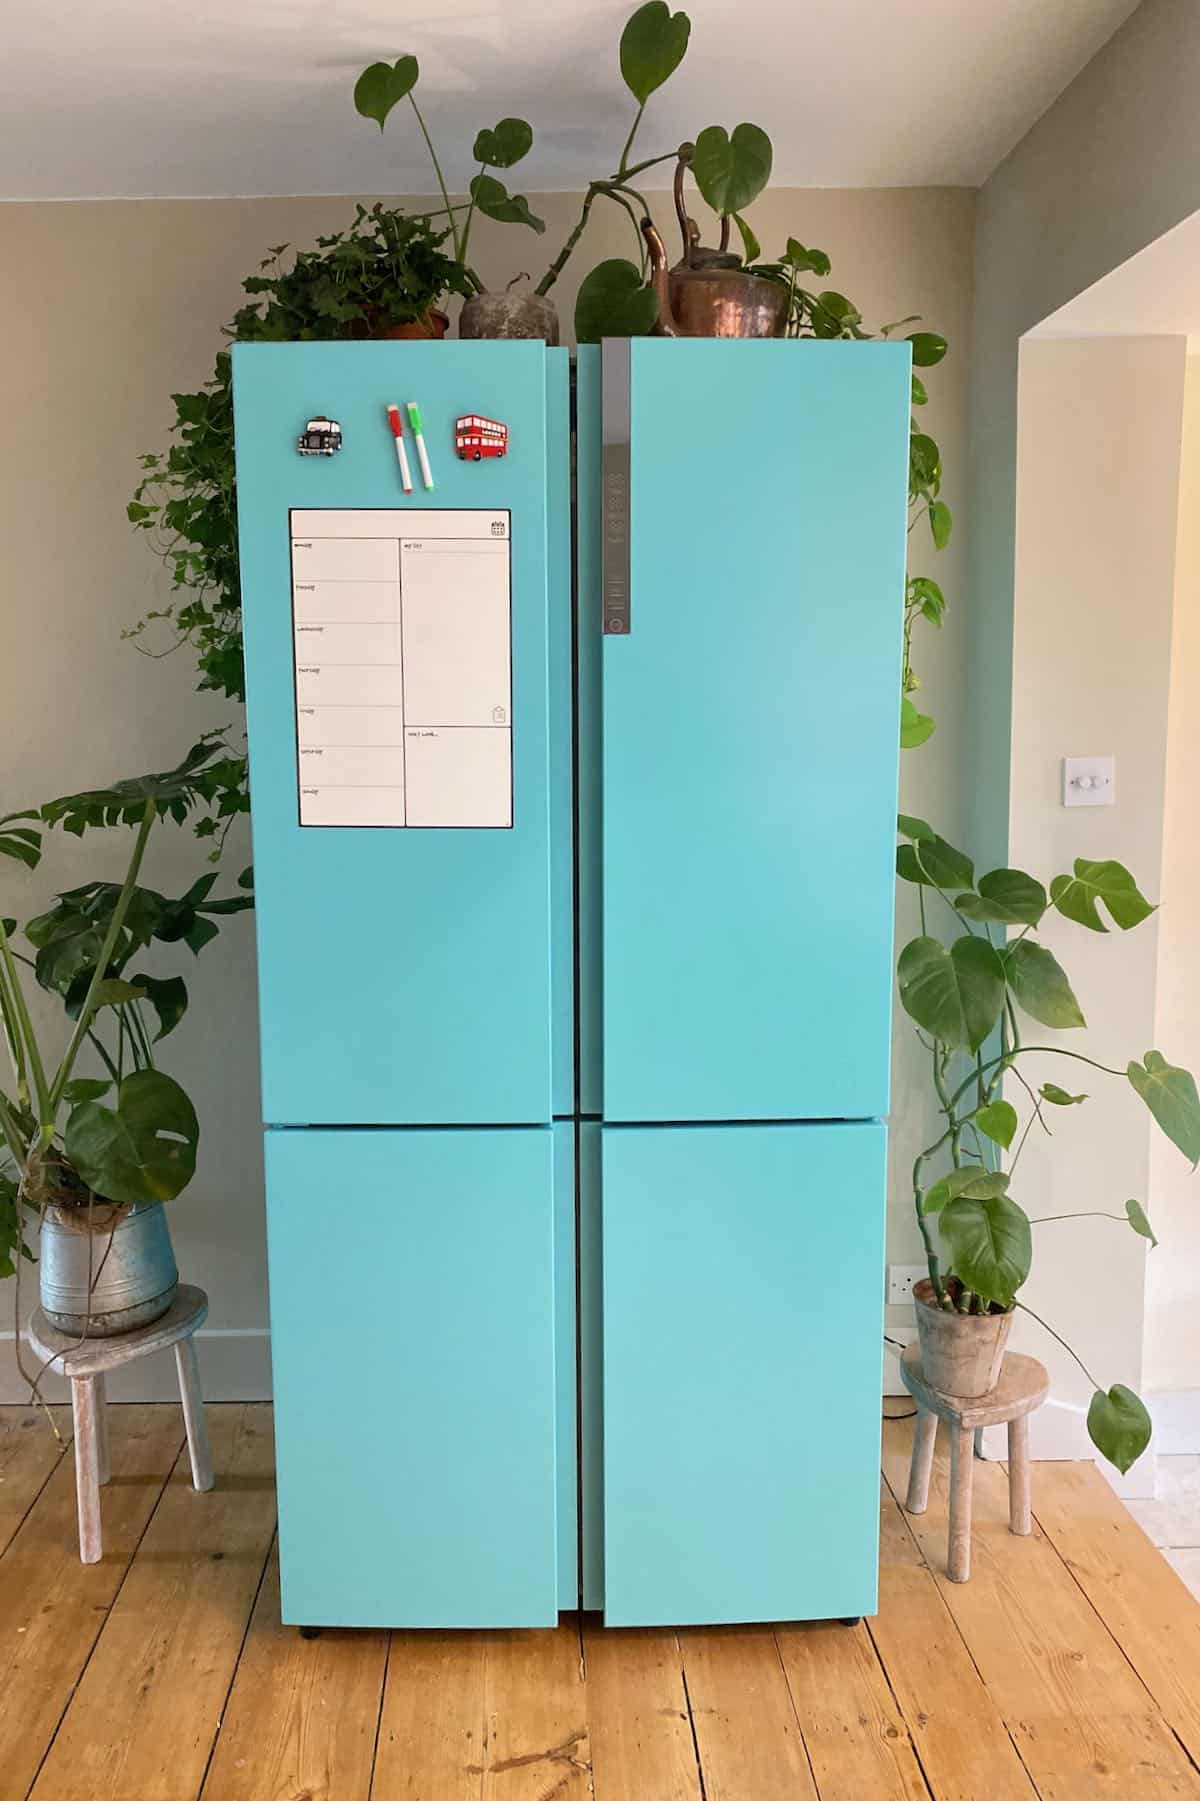 Multi-door fridge freezer freshly painted in turquoise with plants around it. Get a retro refrigerator on a budget